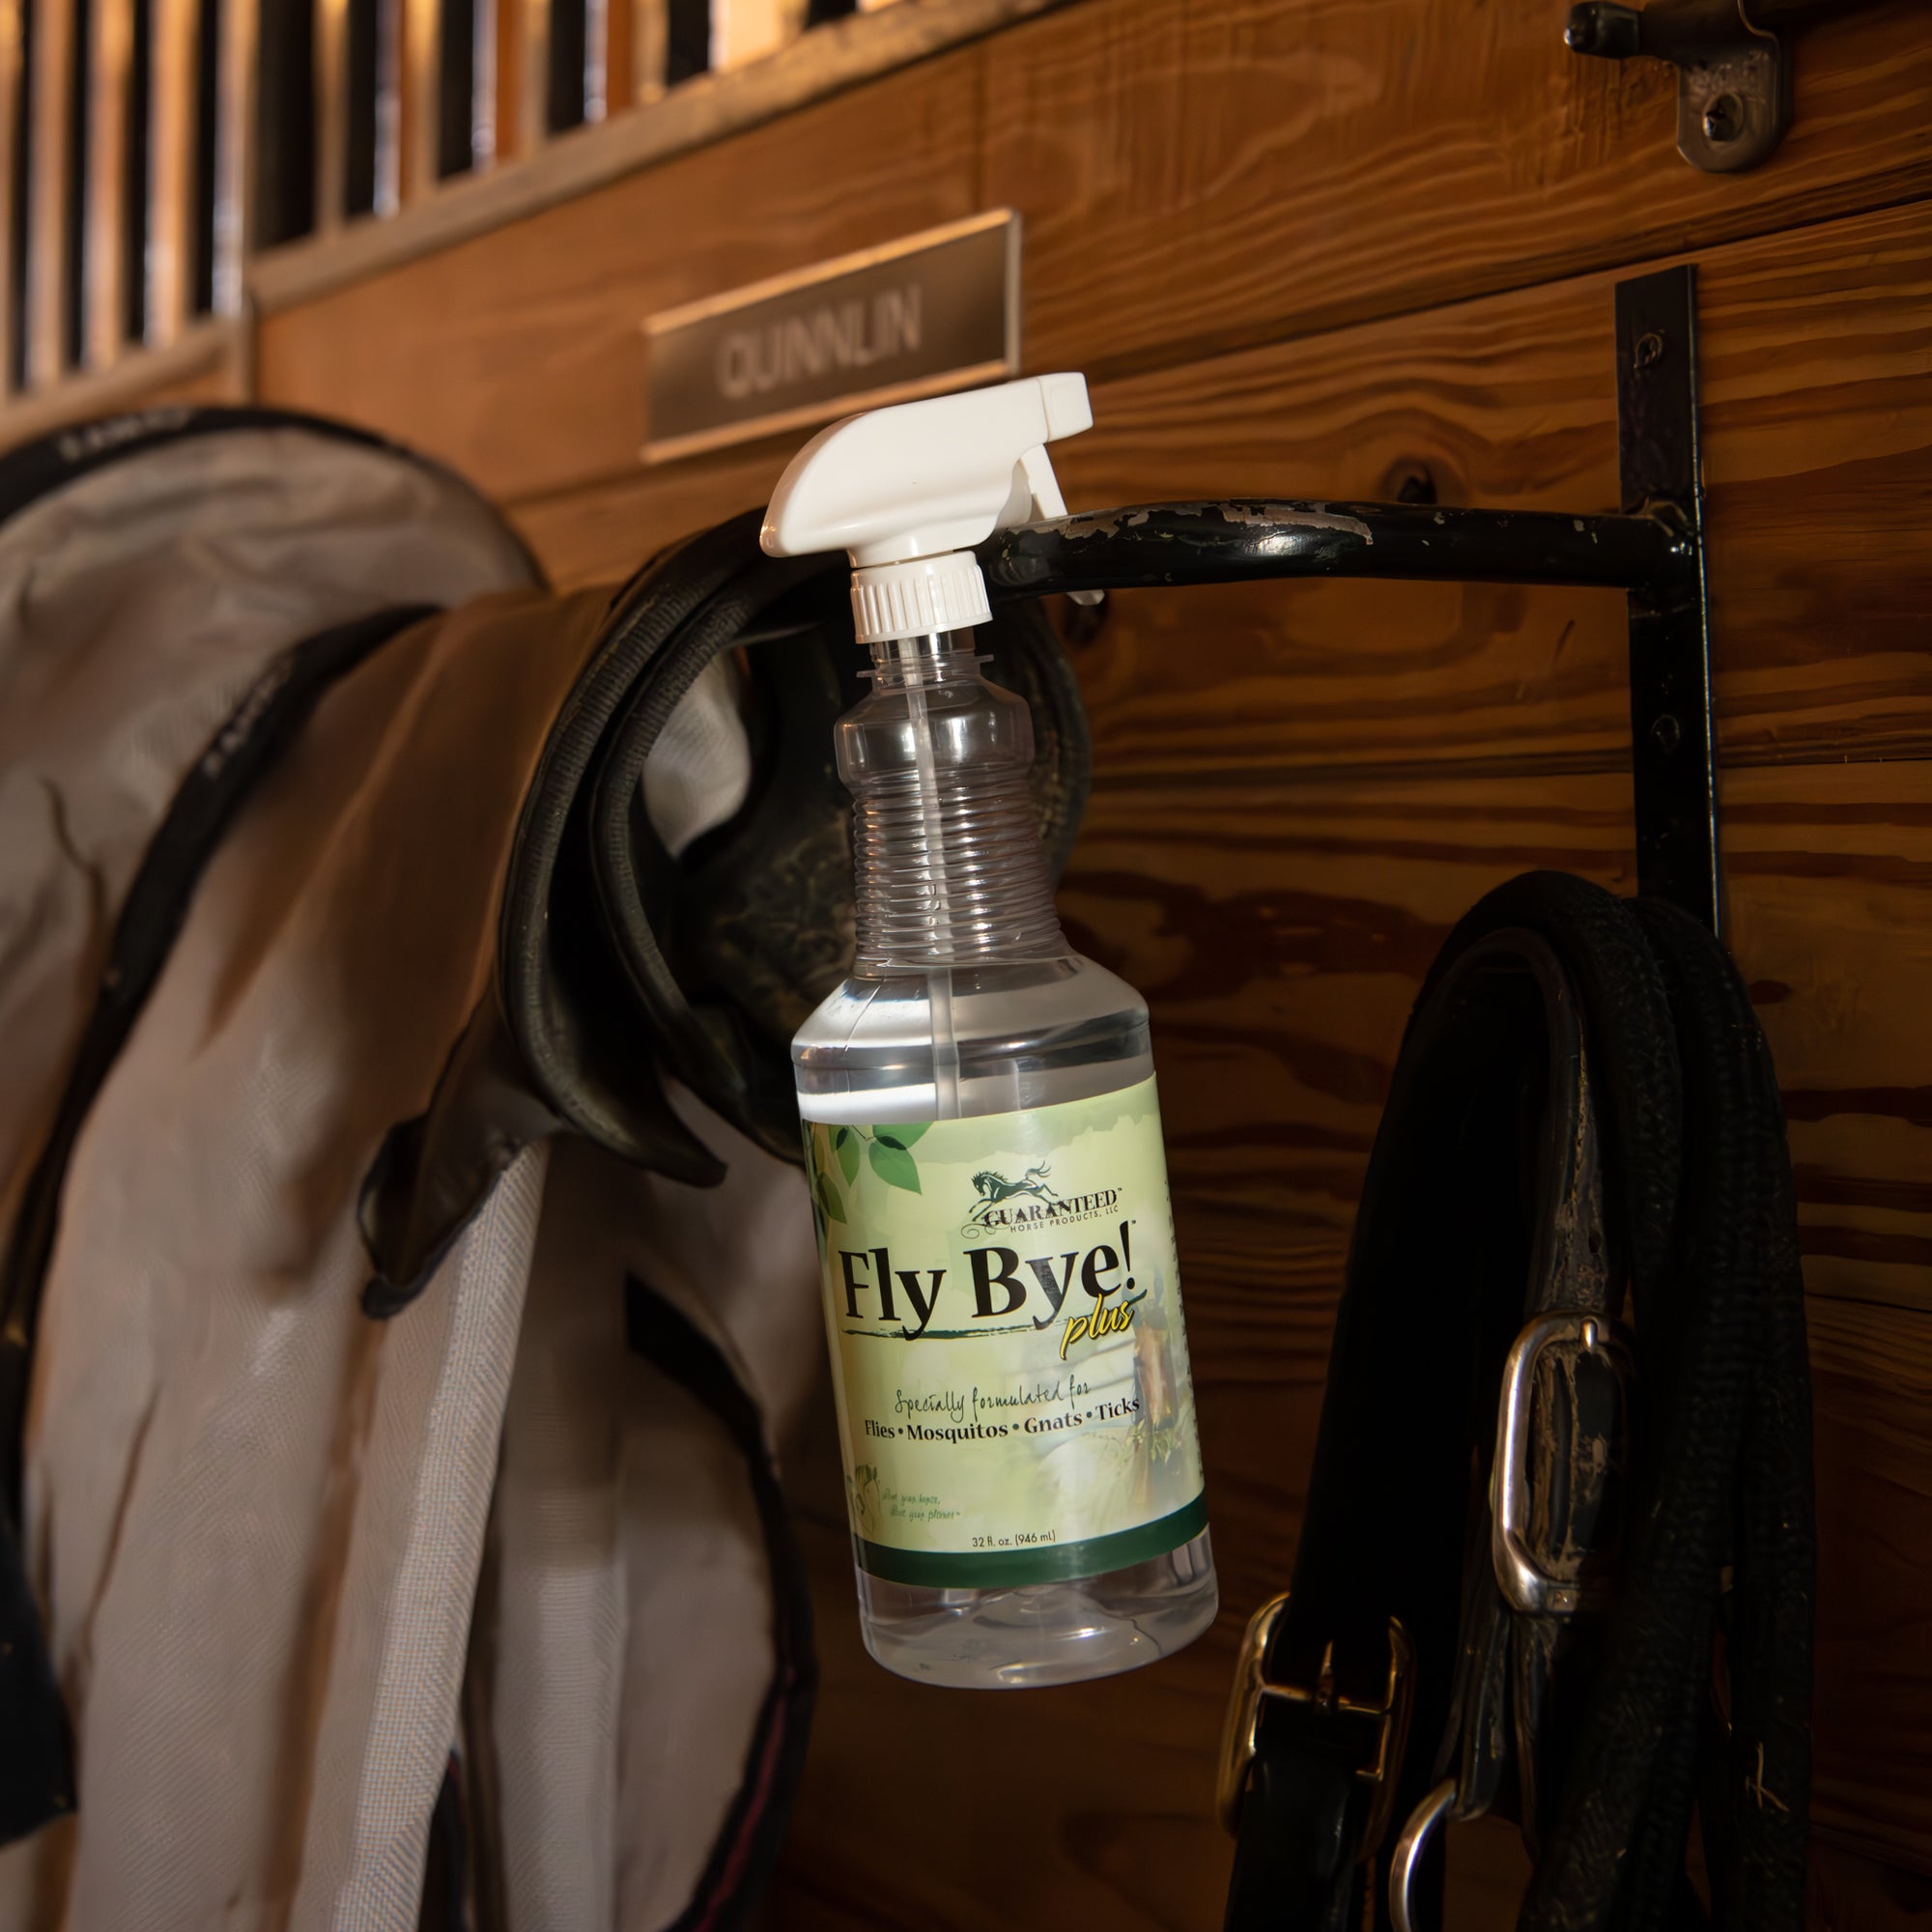 Natural fly repellent for animals, Fly Bye! Plus 